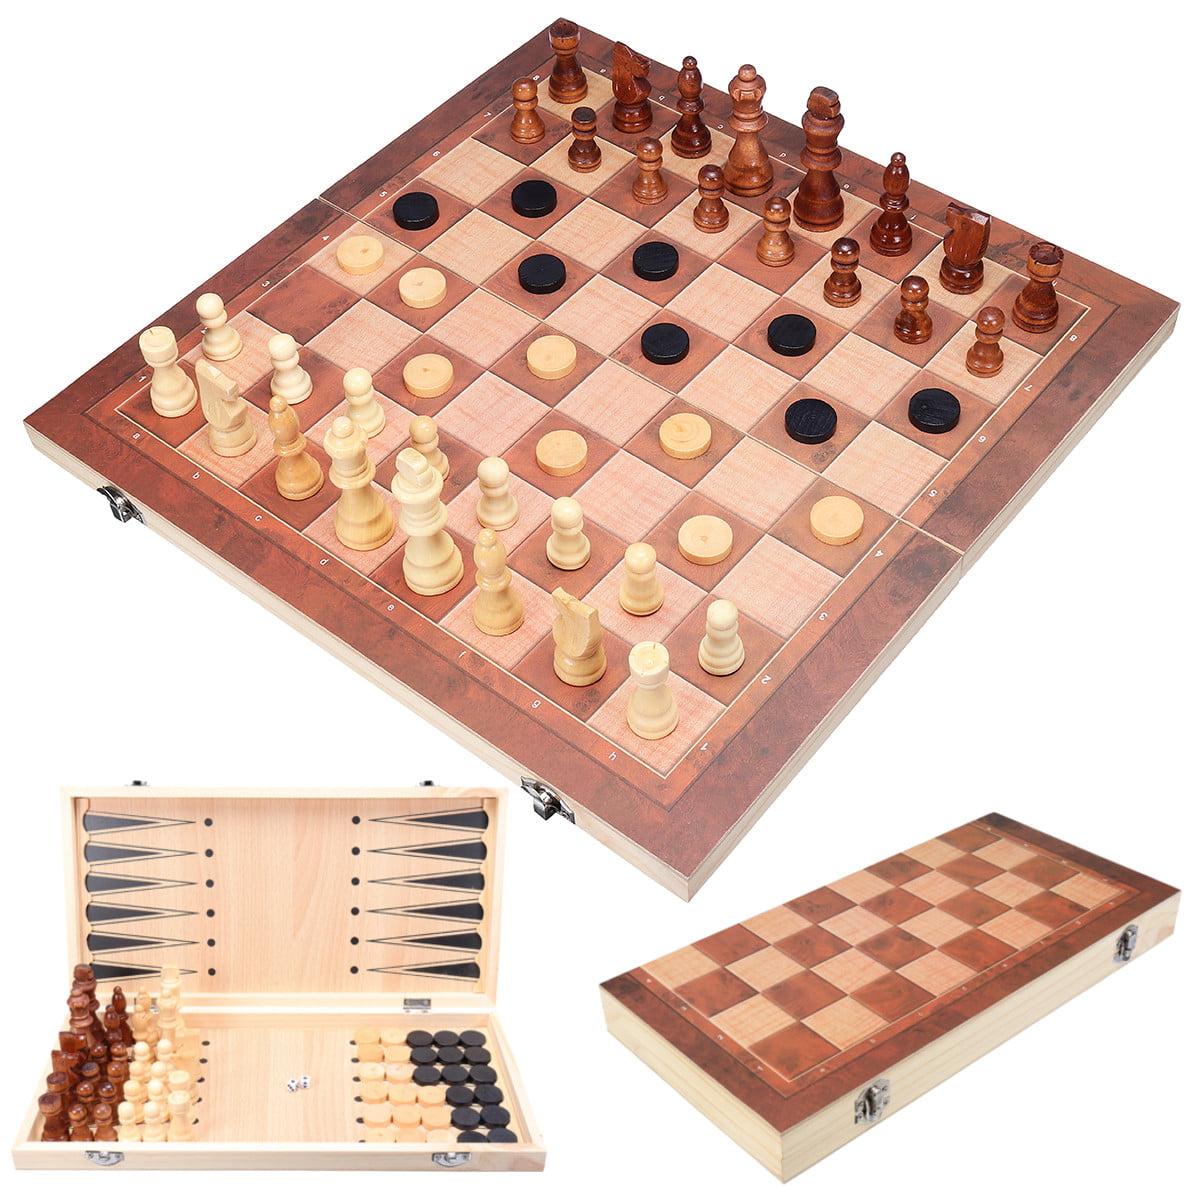 3 in 1 Folding Wooden Chess Set Board Game Checkers Backgammon Draughts Toys UK 